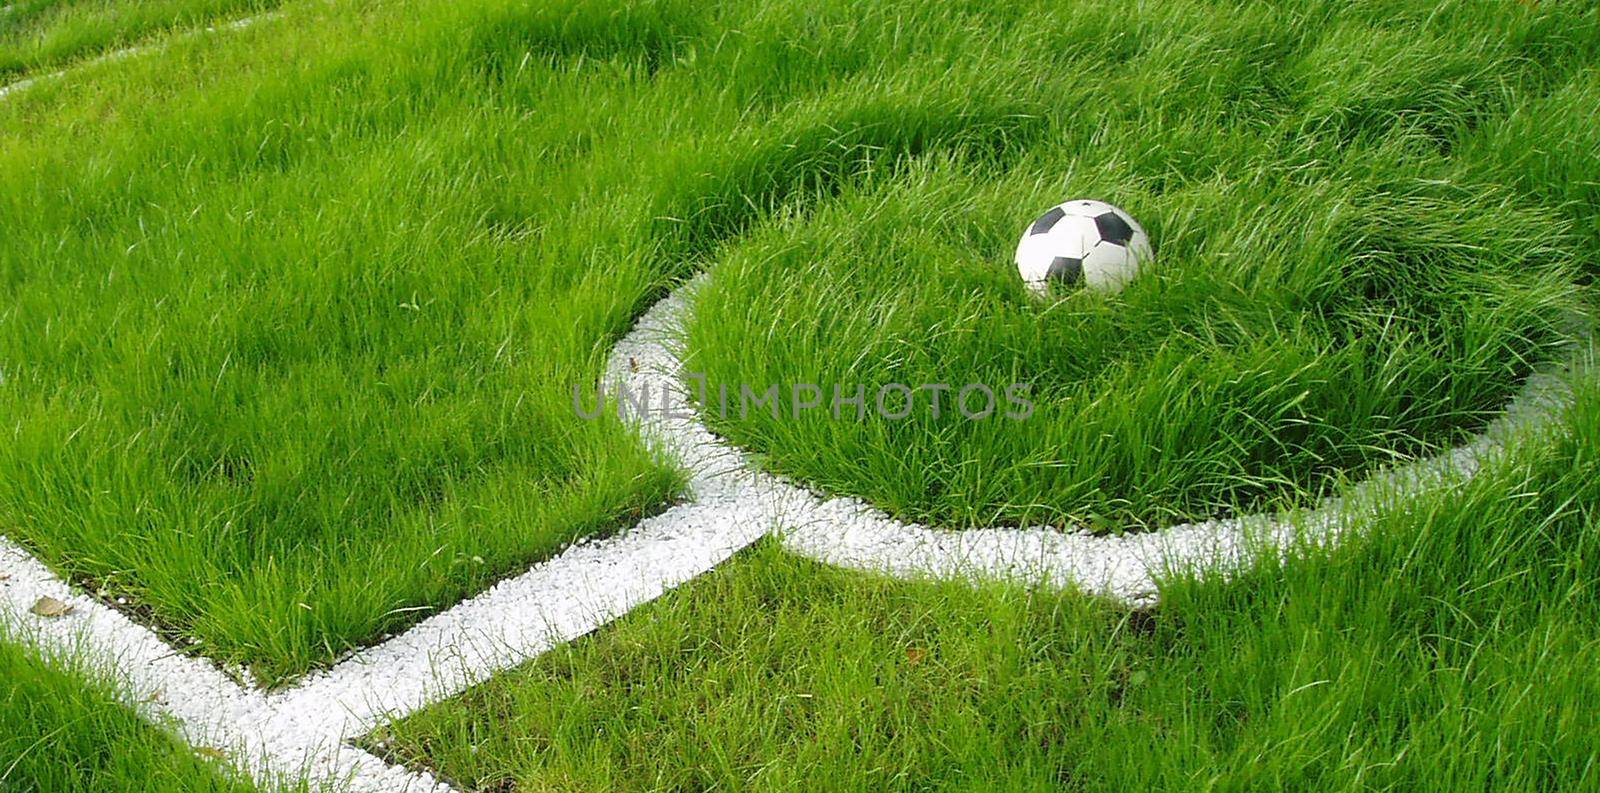 Soccer ball on green grass. Green flowerbed depicting a football field and a ball.